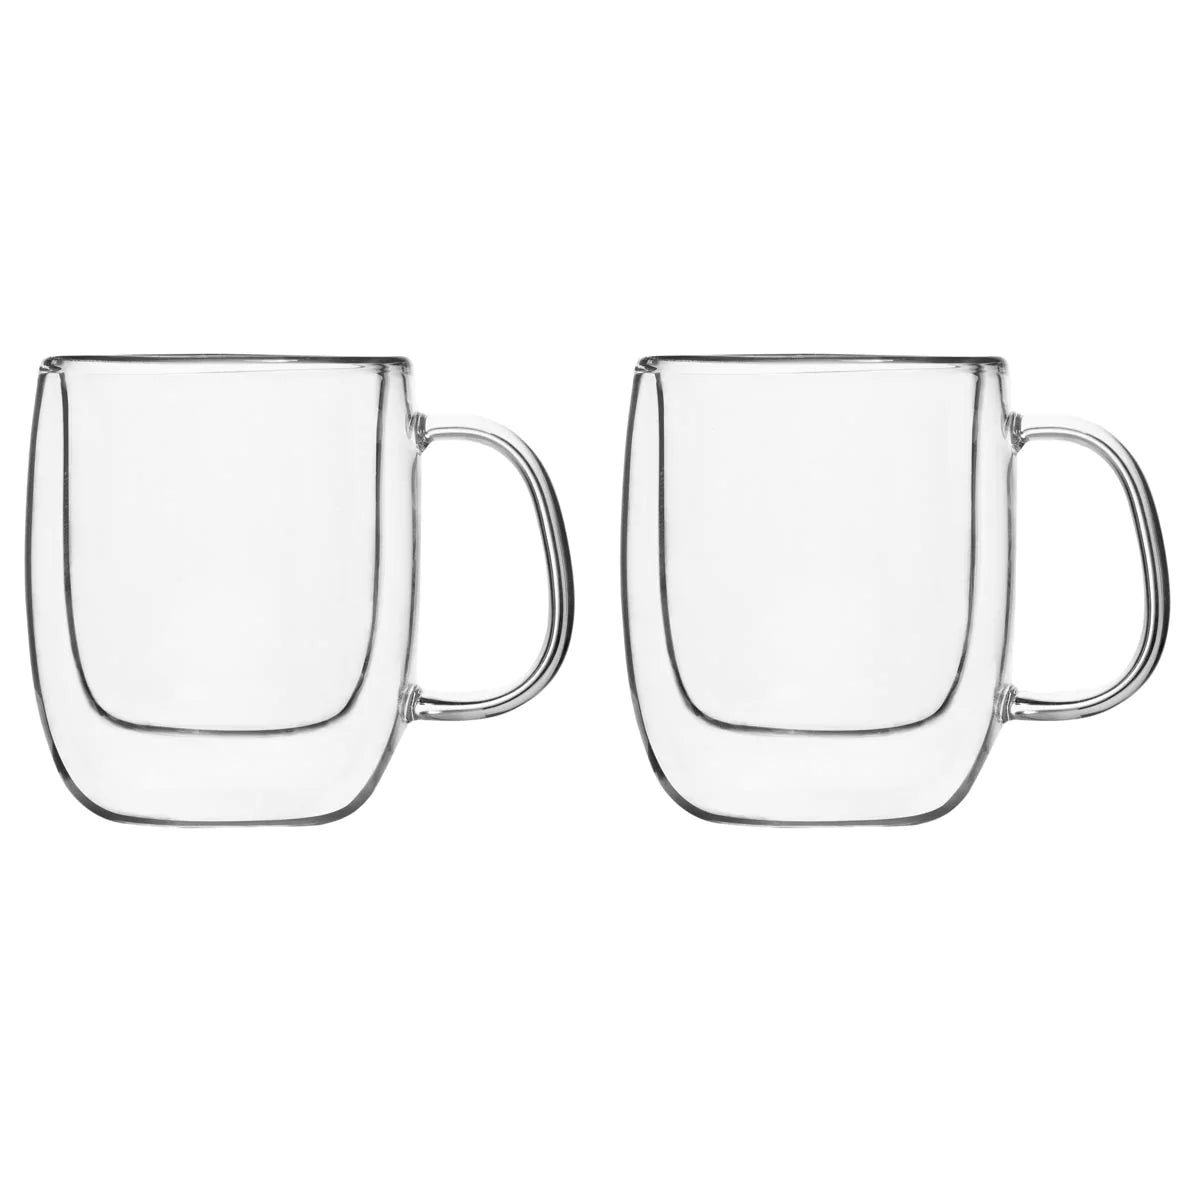 Double-walled espresso cups 80 ml, 2 units, by Barista+